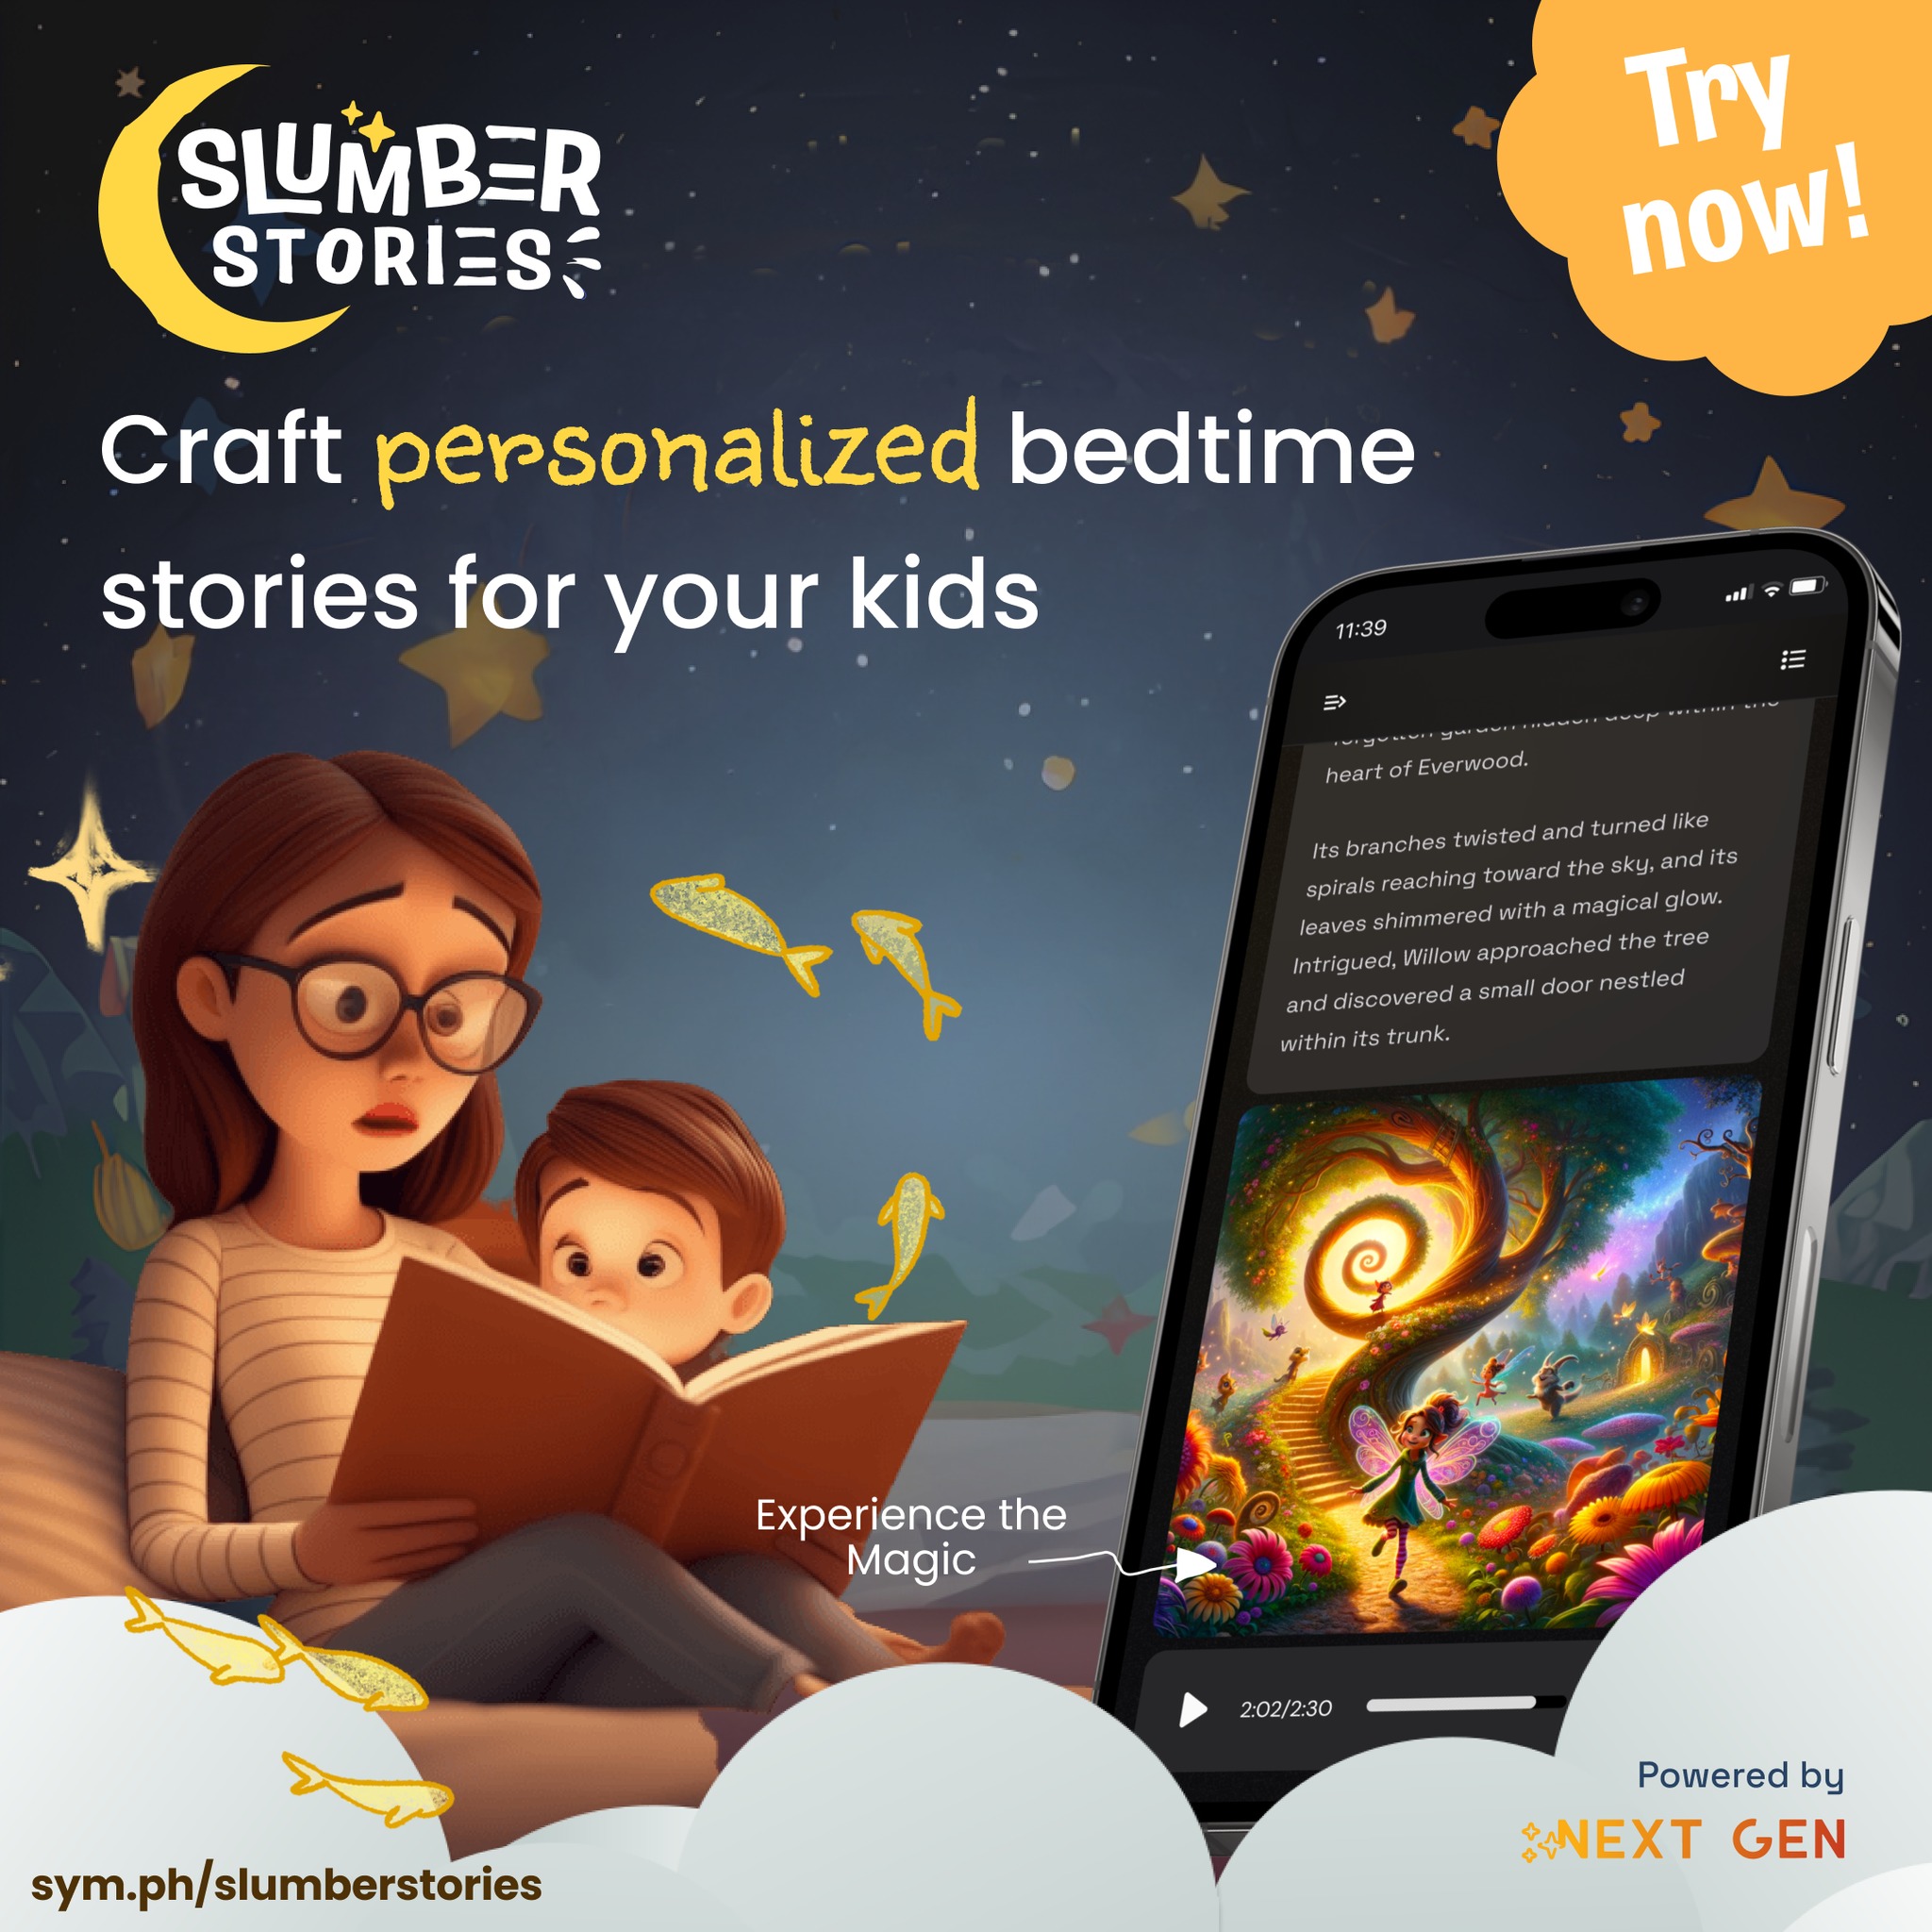 Craft personalized bedtime stories for your kids